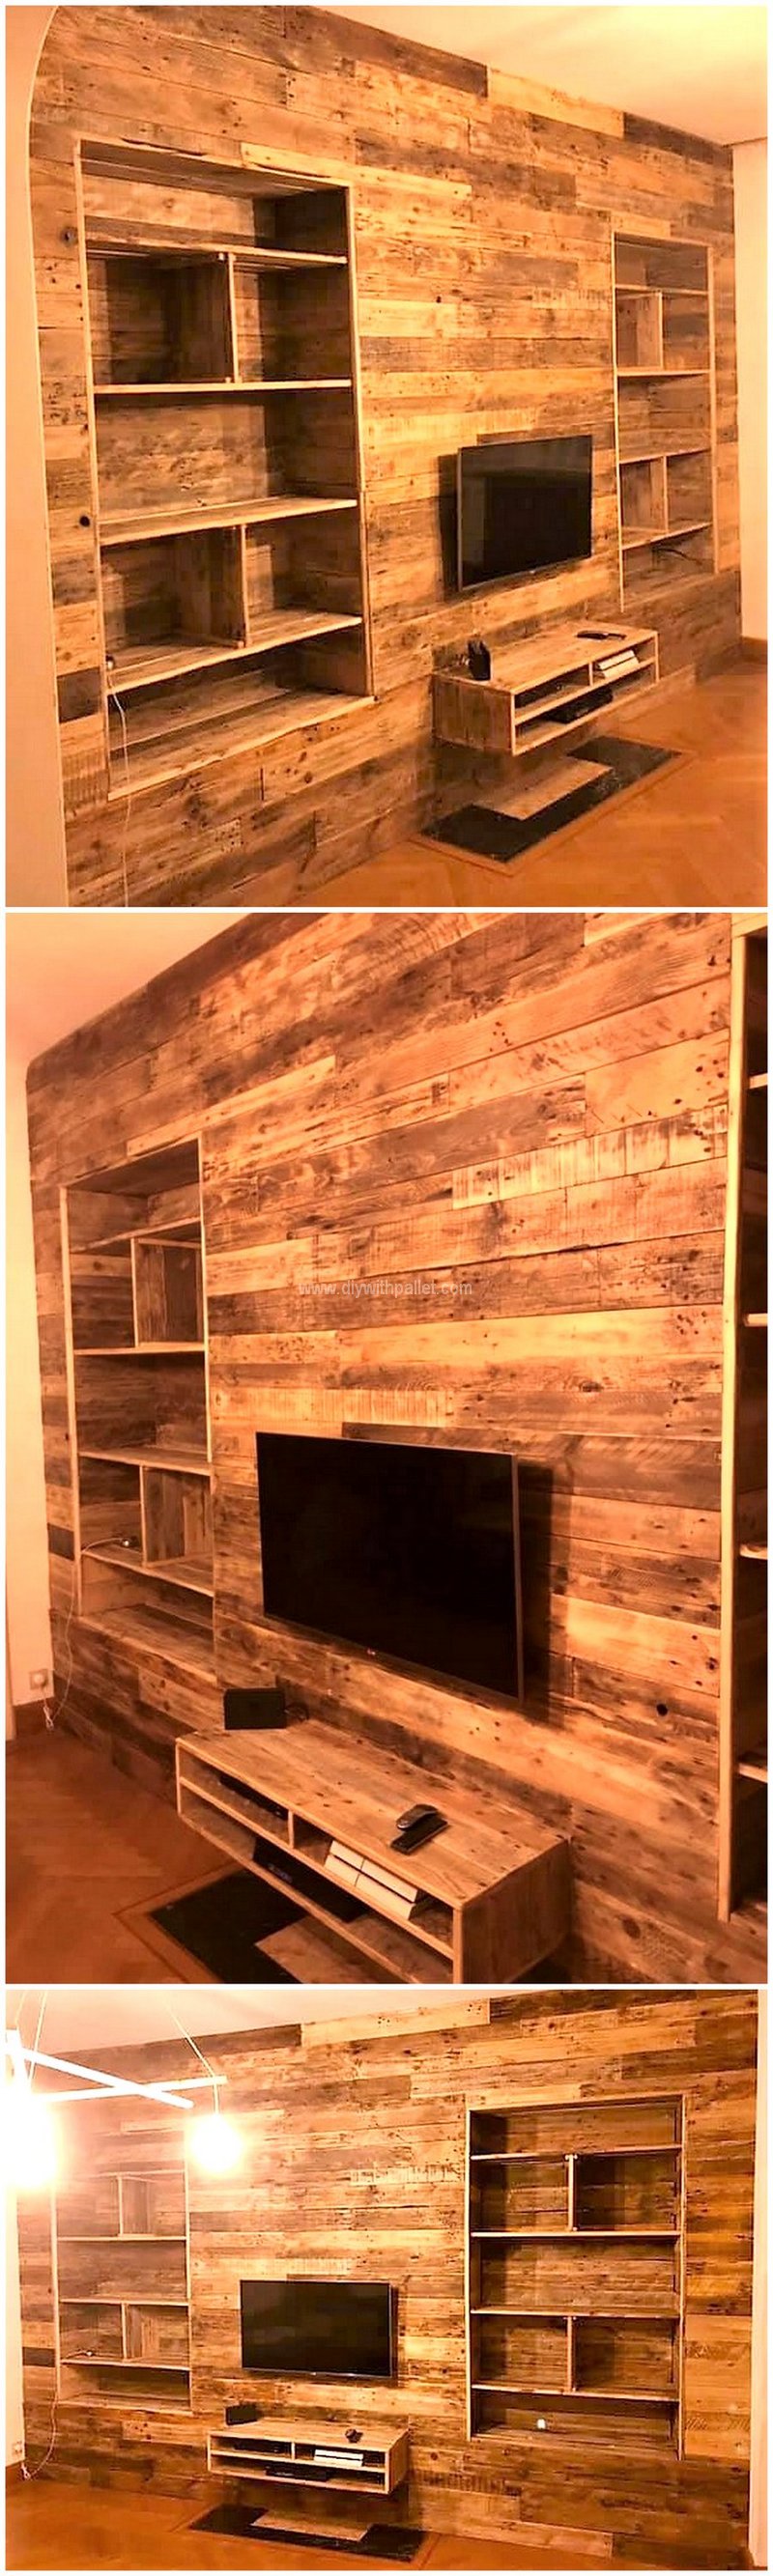 wooden pallet wall works